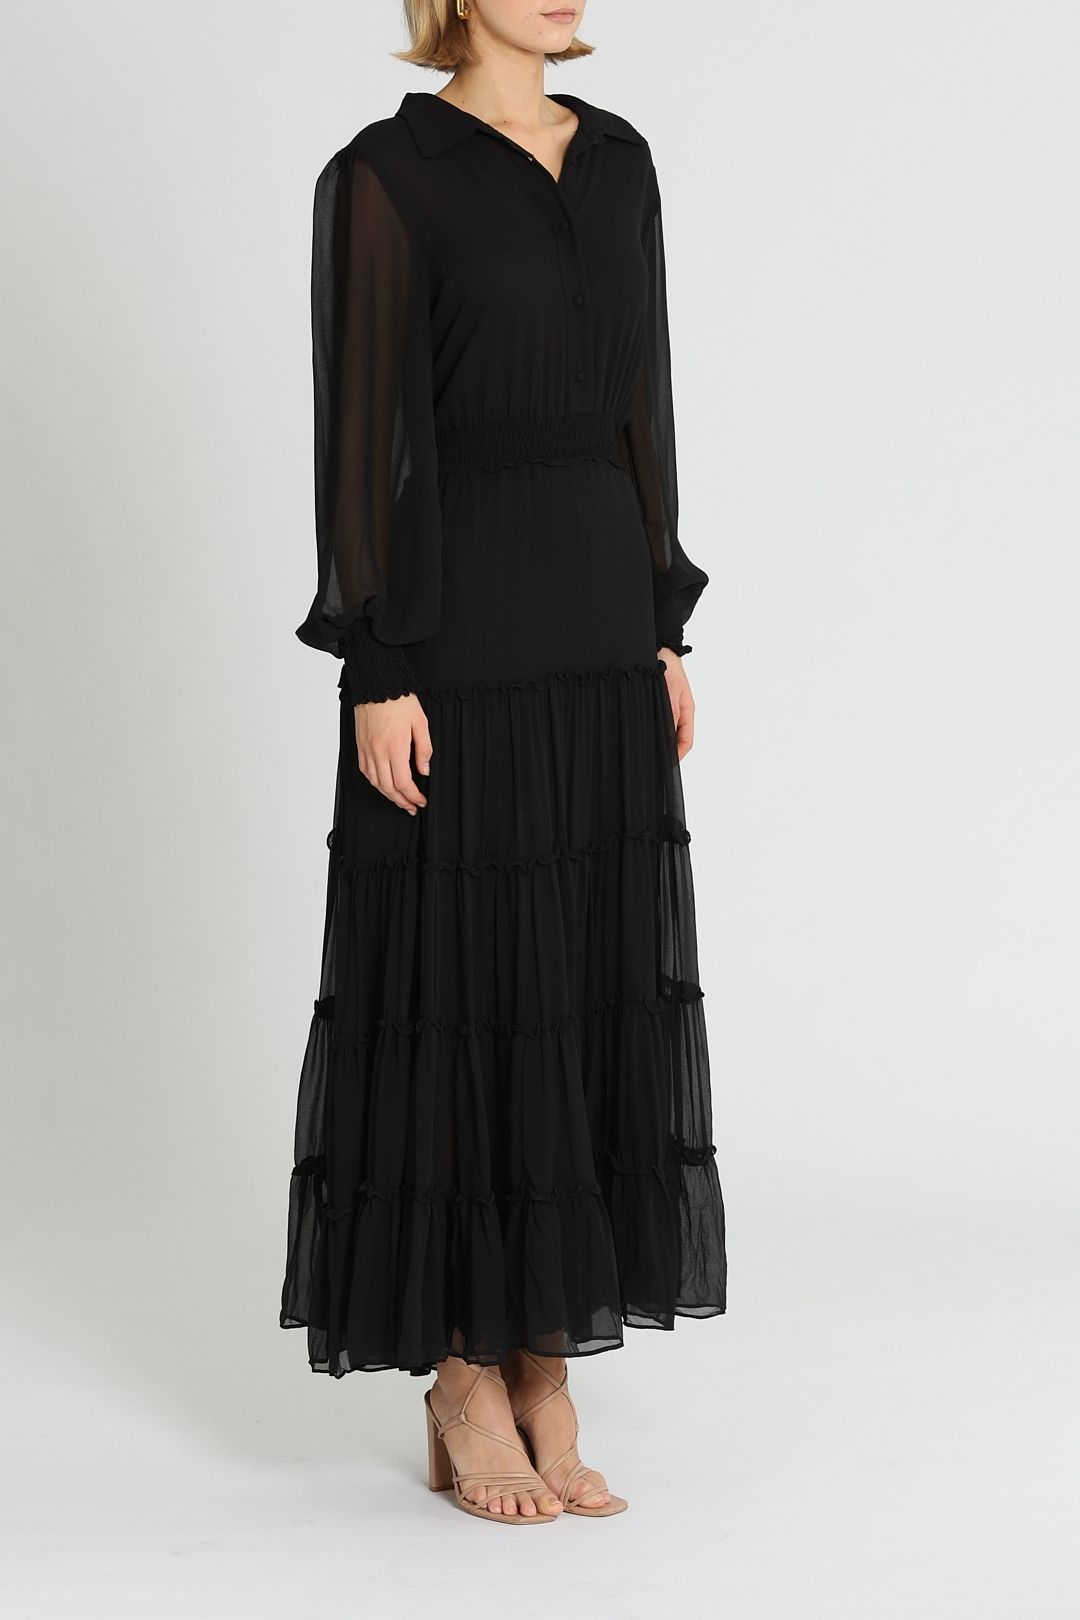 Brave And True Lido Dress Sheer Sleeves